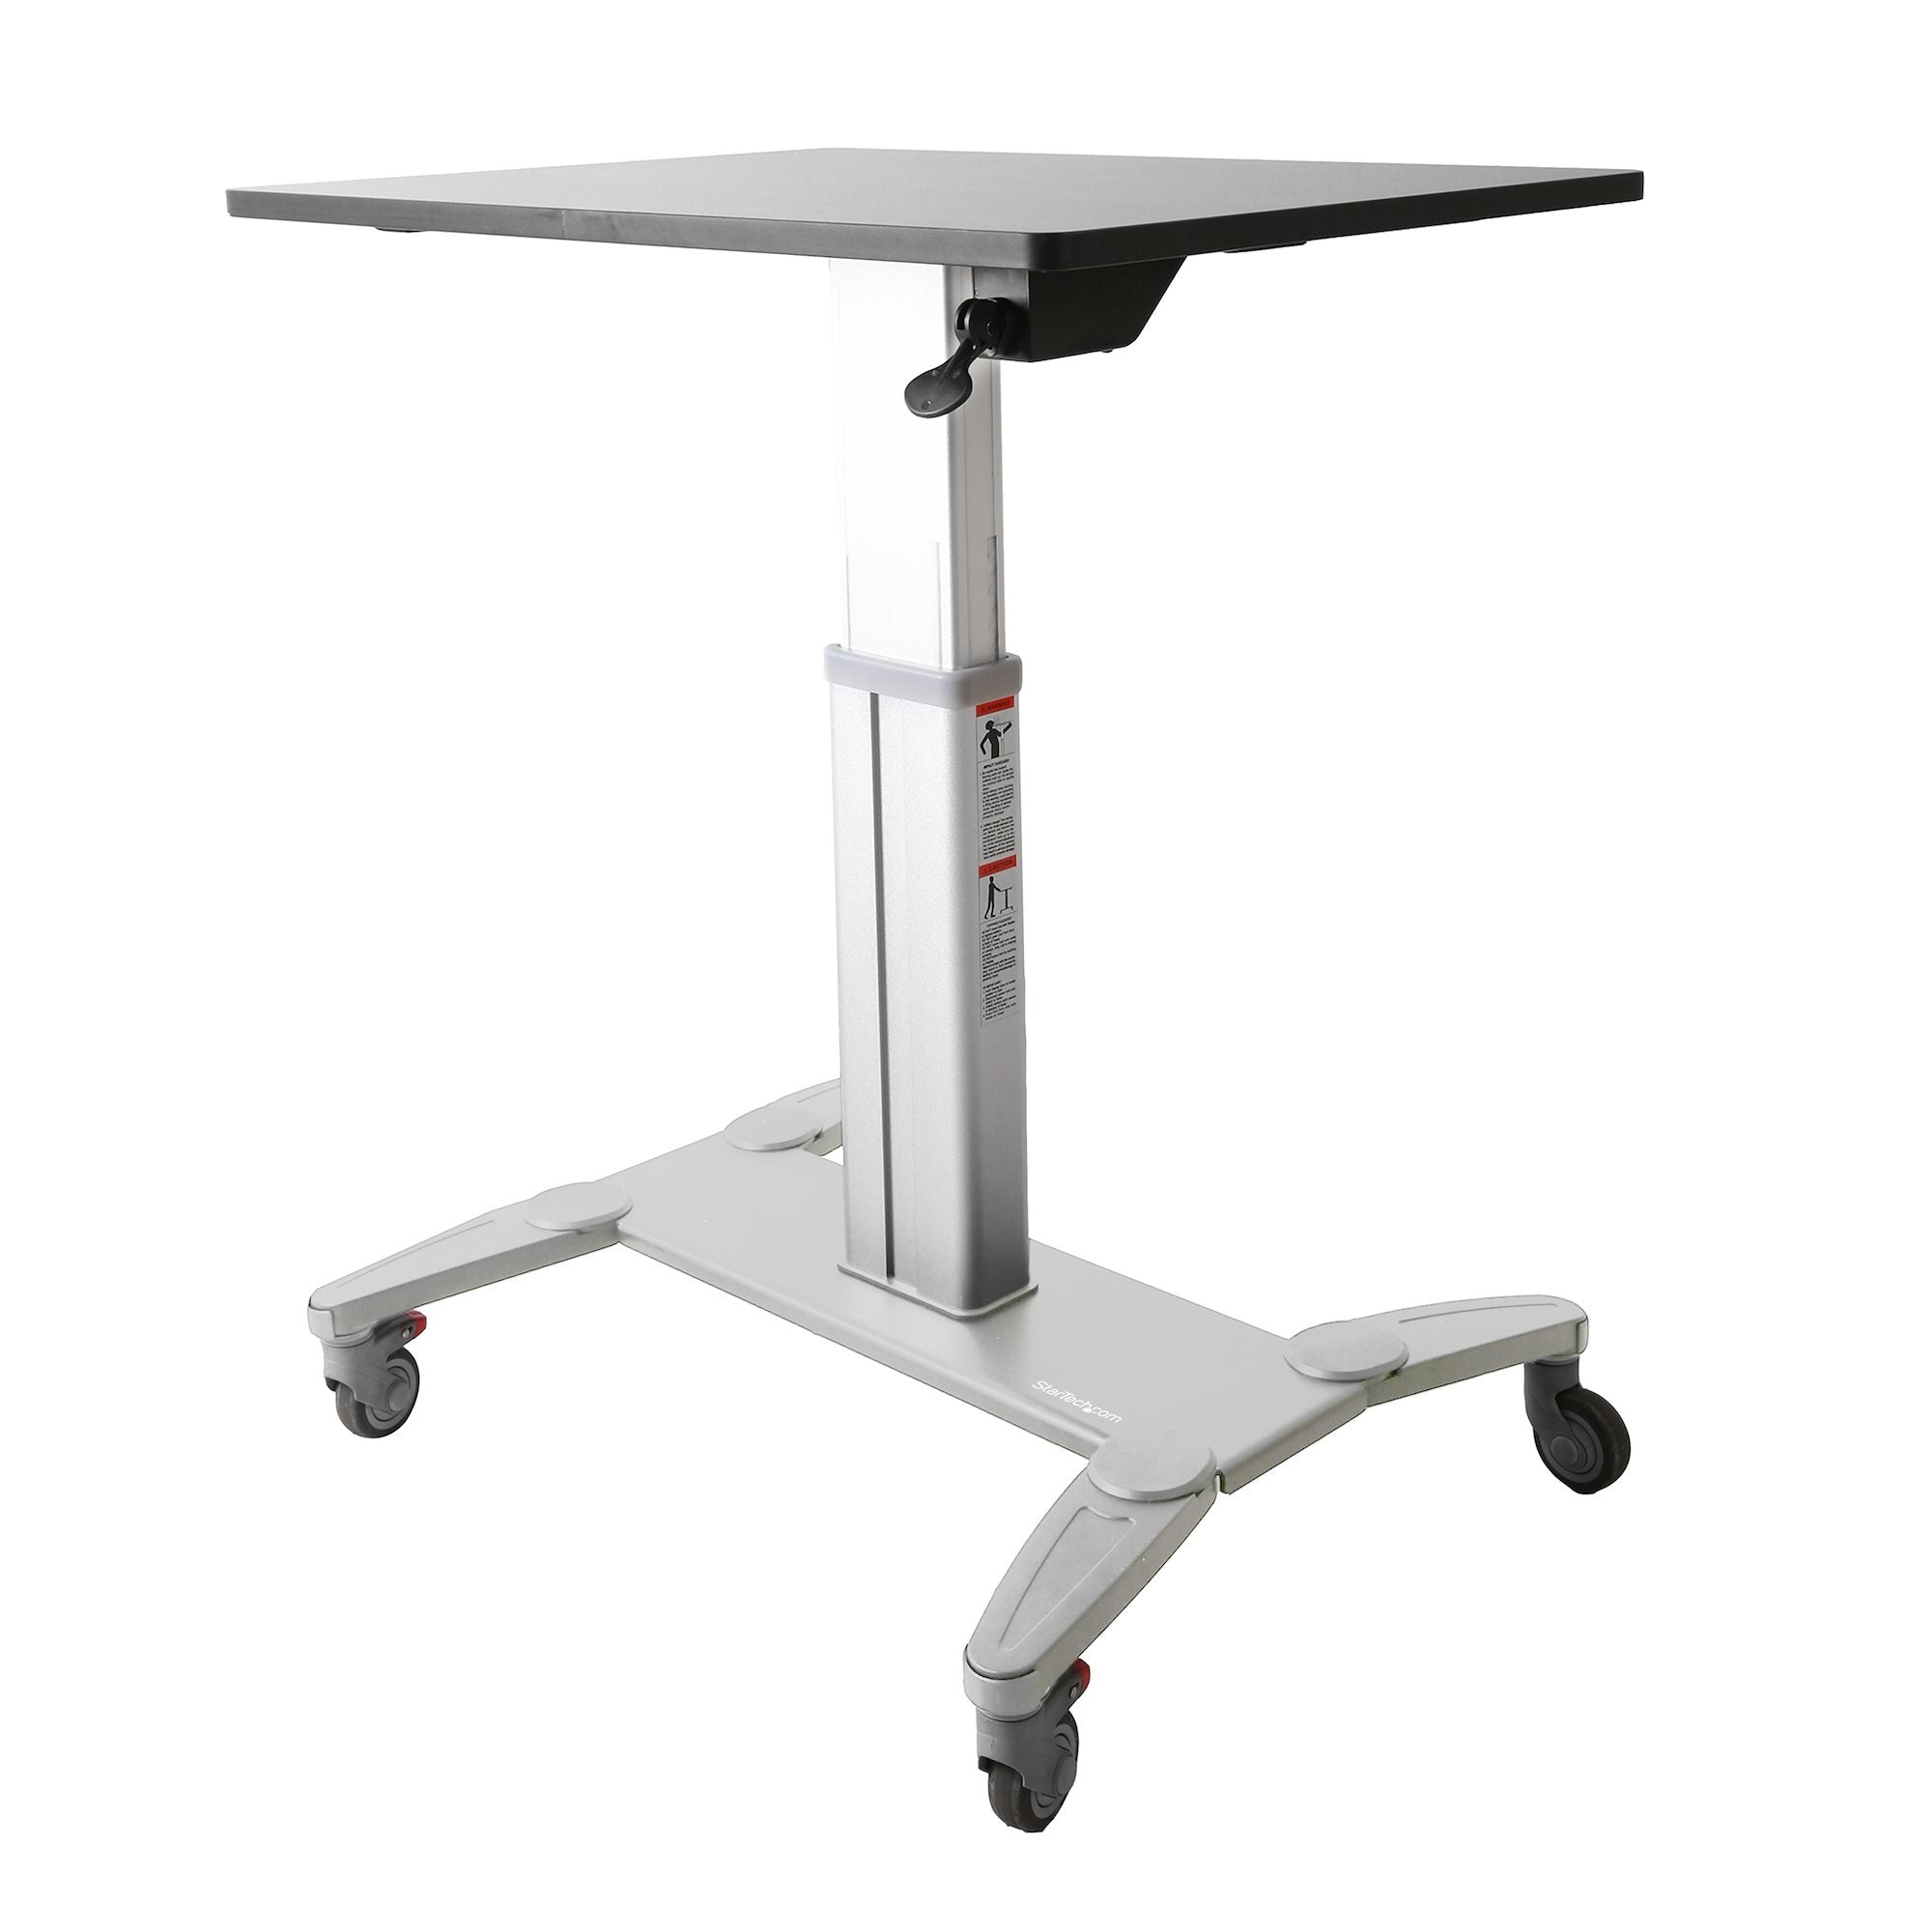 Mobile Standing Desk - Portable Sit Stand Ergonomic Height Adjustable Cart on Wheels - Rolling Computer/Laptop Workstation Table with Locking One-Touch Lift for Teacher/Student